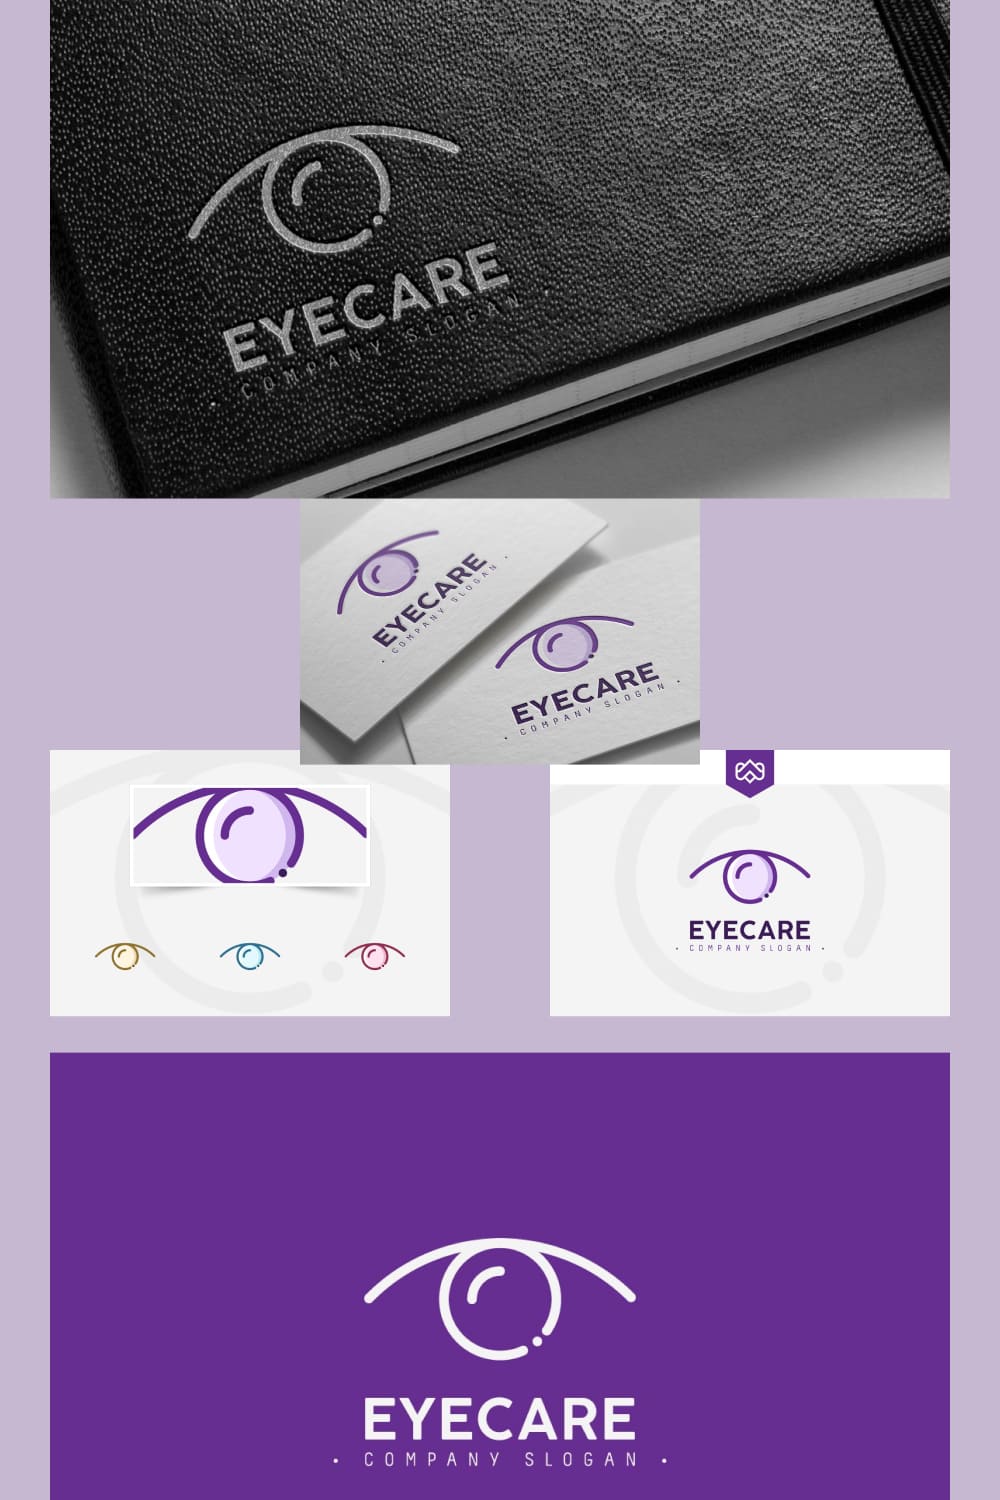 These beauty themed logos were created for making successful business.